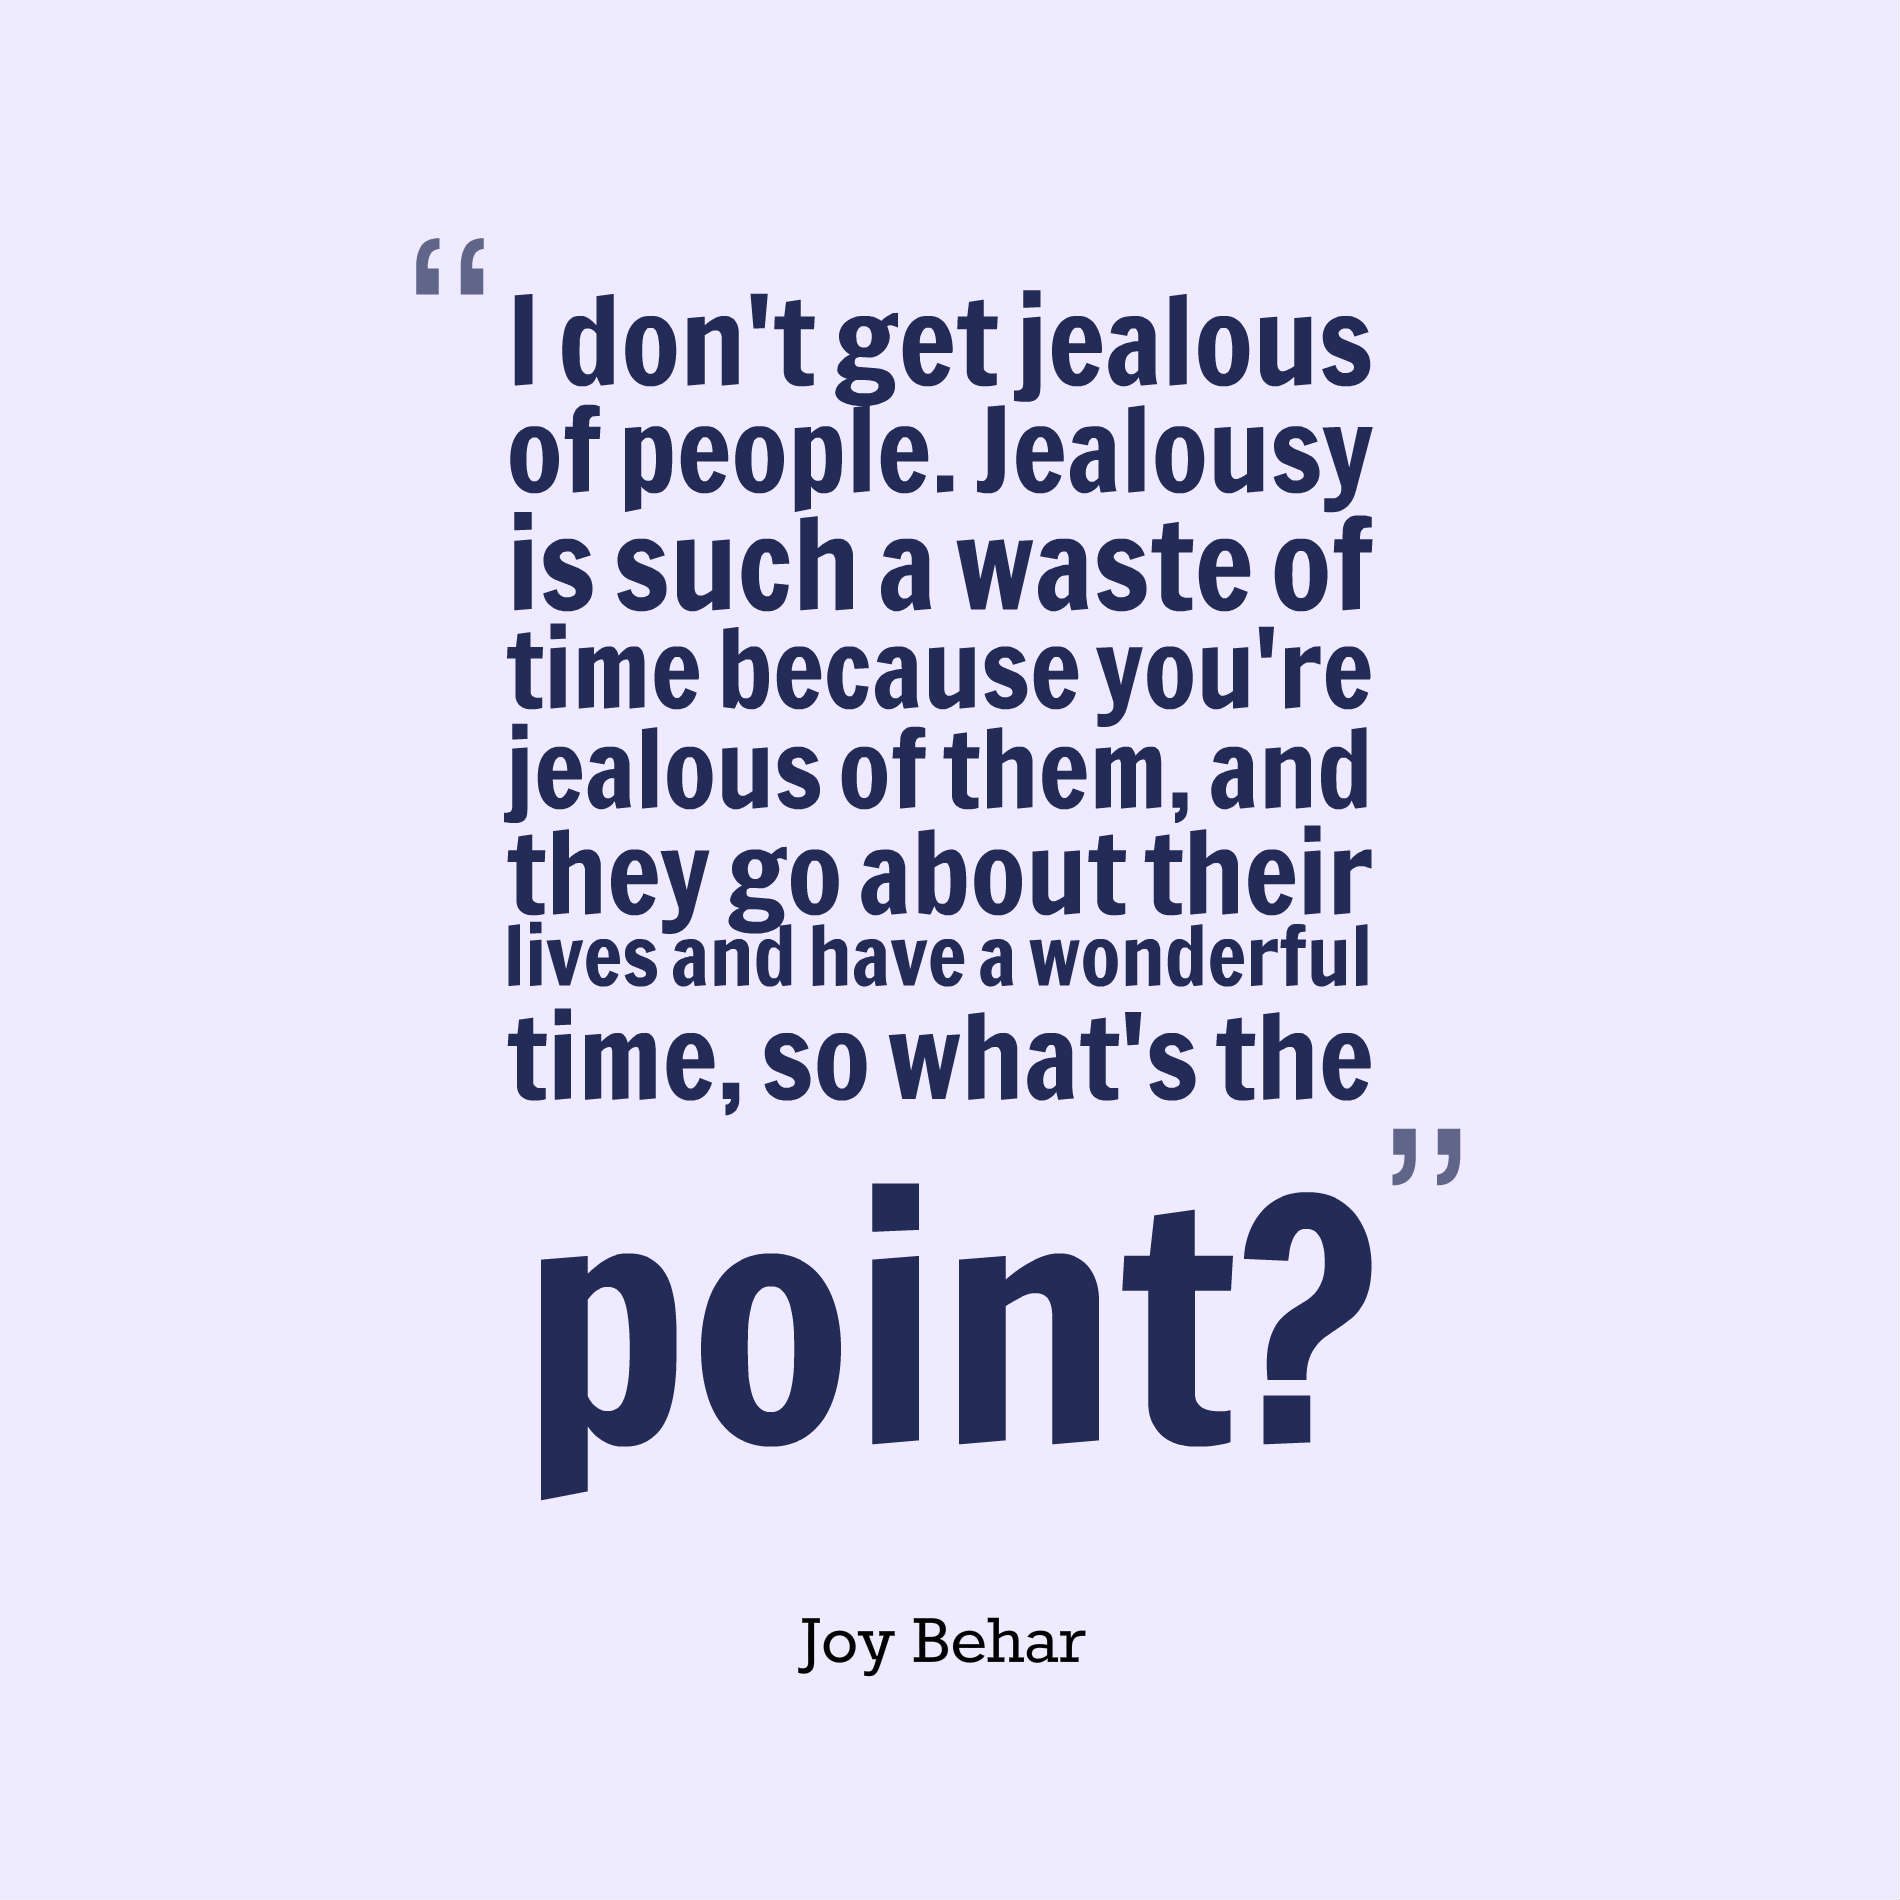 I don't get jealous of people. Jealousy is such a waste of time because you're jealous of them, and they go about their lives and have a wonderful time, so what's the point?